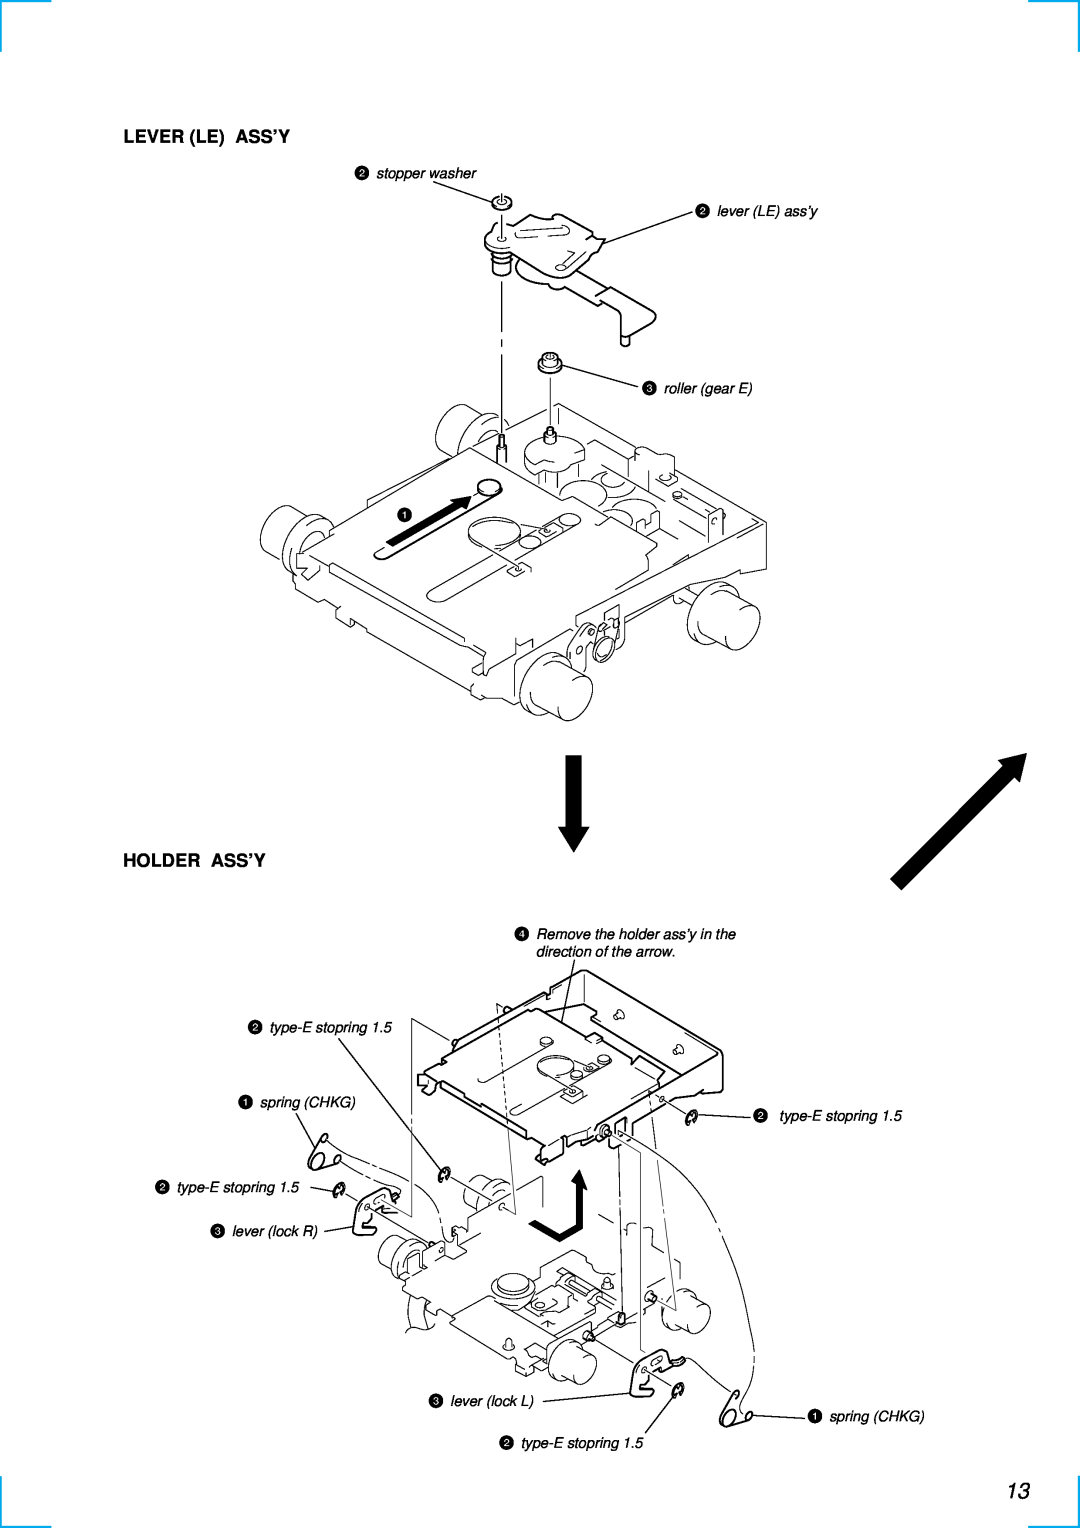 Sony MDX-C6500RV service manual Lever Le Ass’Y, Holder Ass’Y, 2stopper washer 2 lever LE ass’y 3 roller gear E 